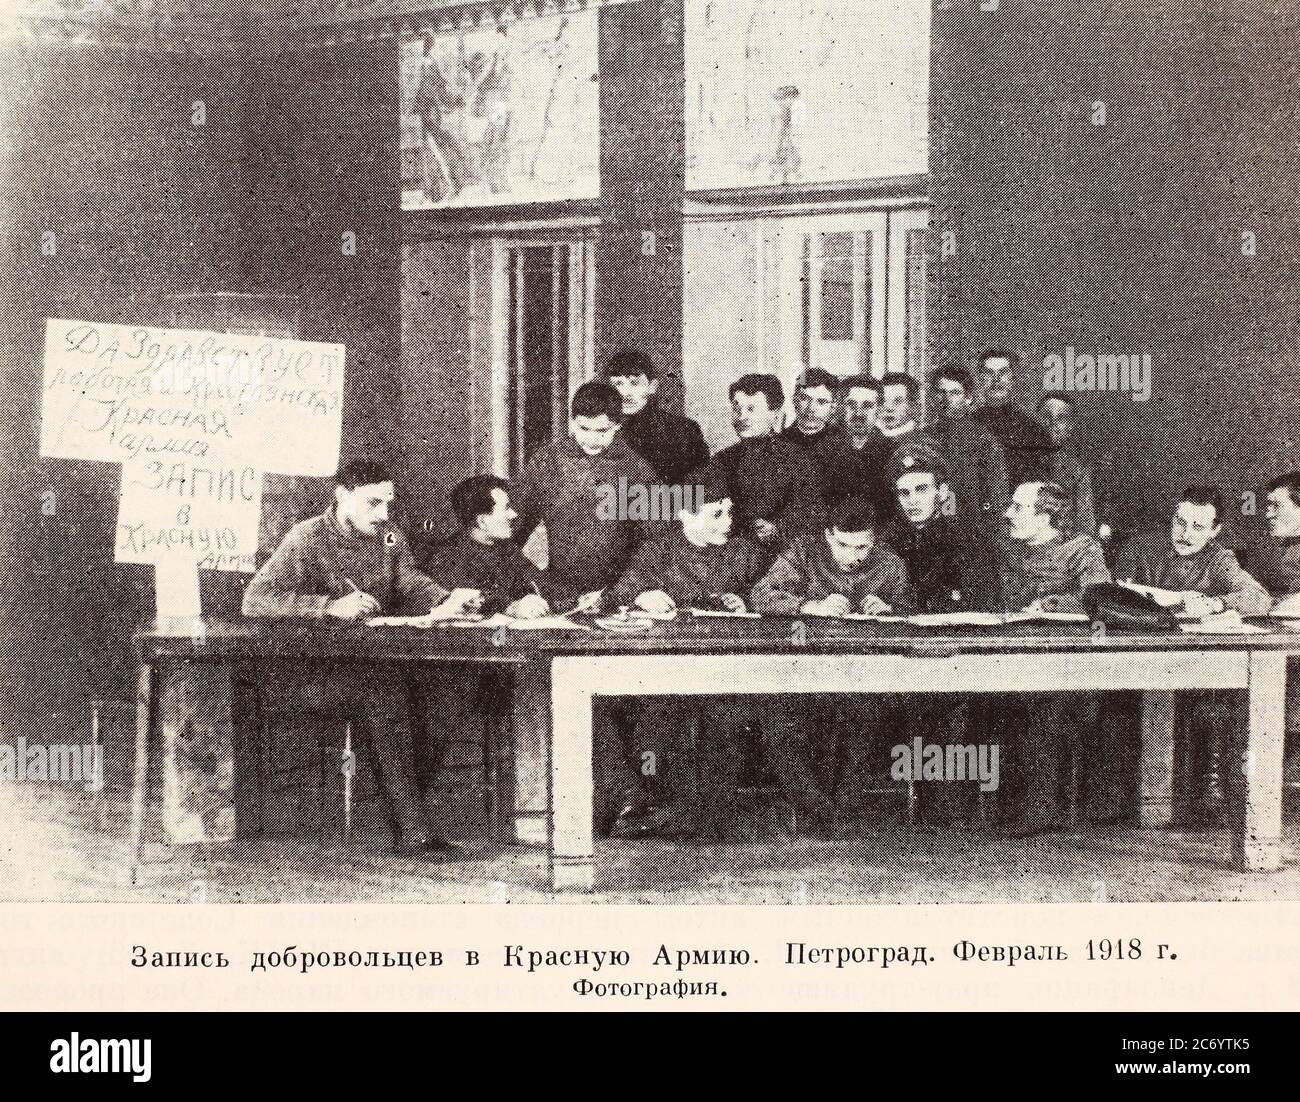 Record of volunteers in the Red Army. Petrograd. February 1918. Stock Photo